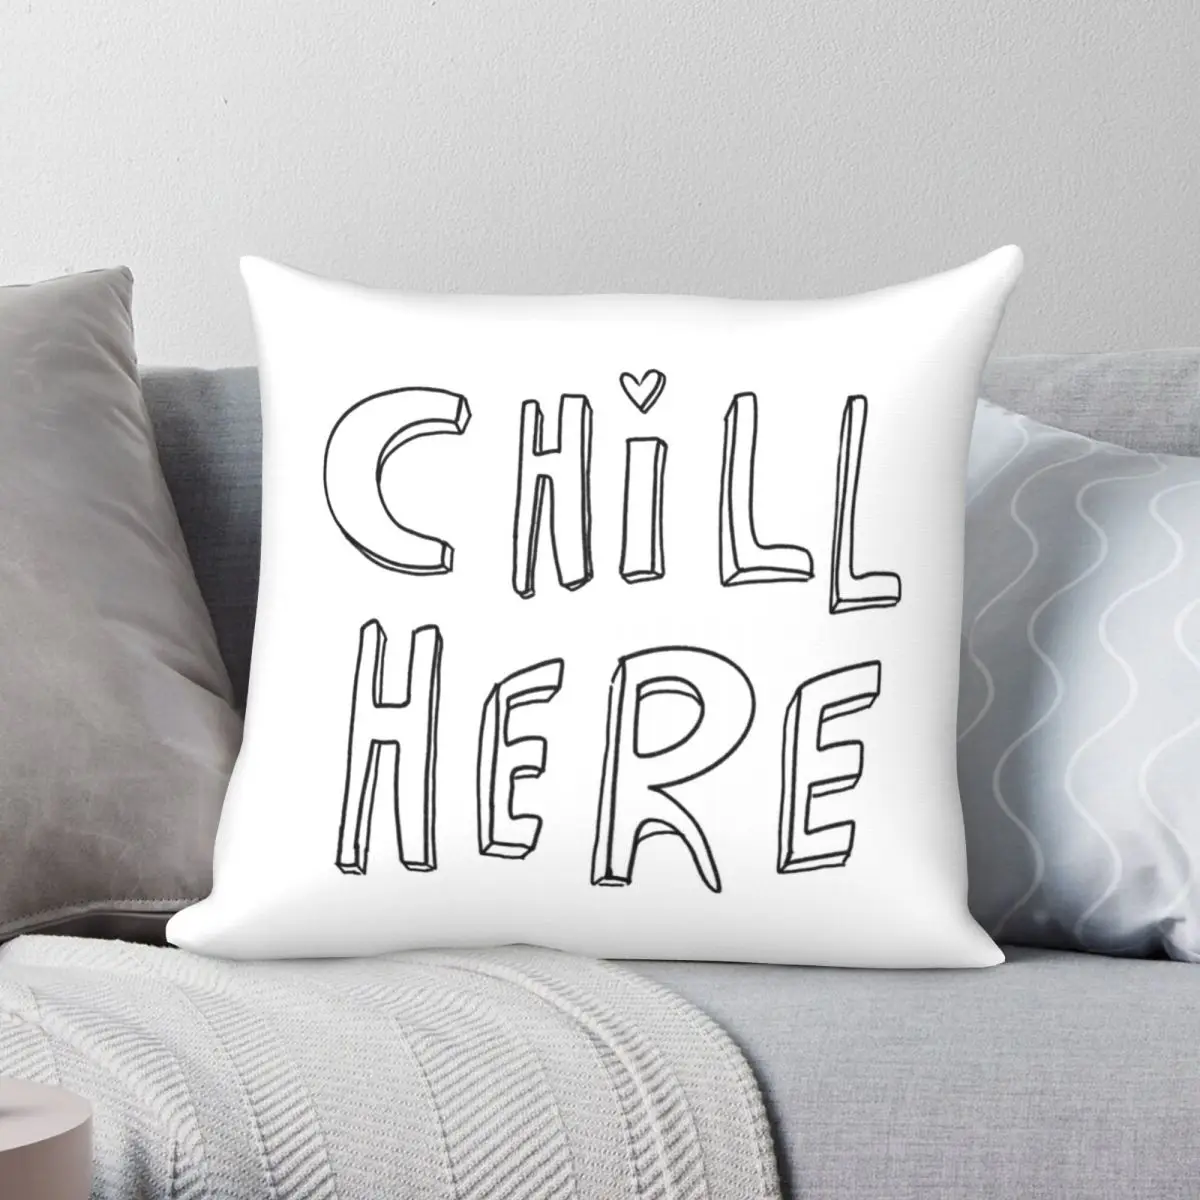 

CHILL HERE Typography Writing Pillowcase Polyester Linen Velvet Printed Zip Decor Sofa Seater Cushion Cover